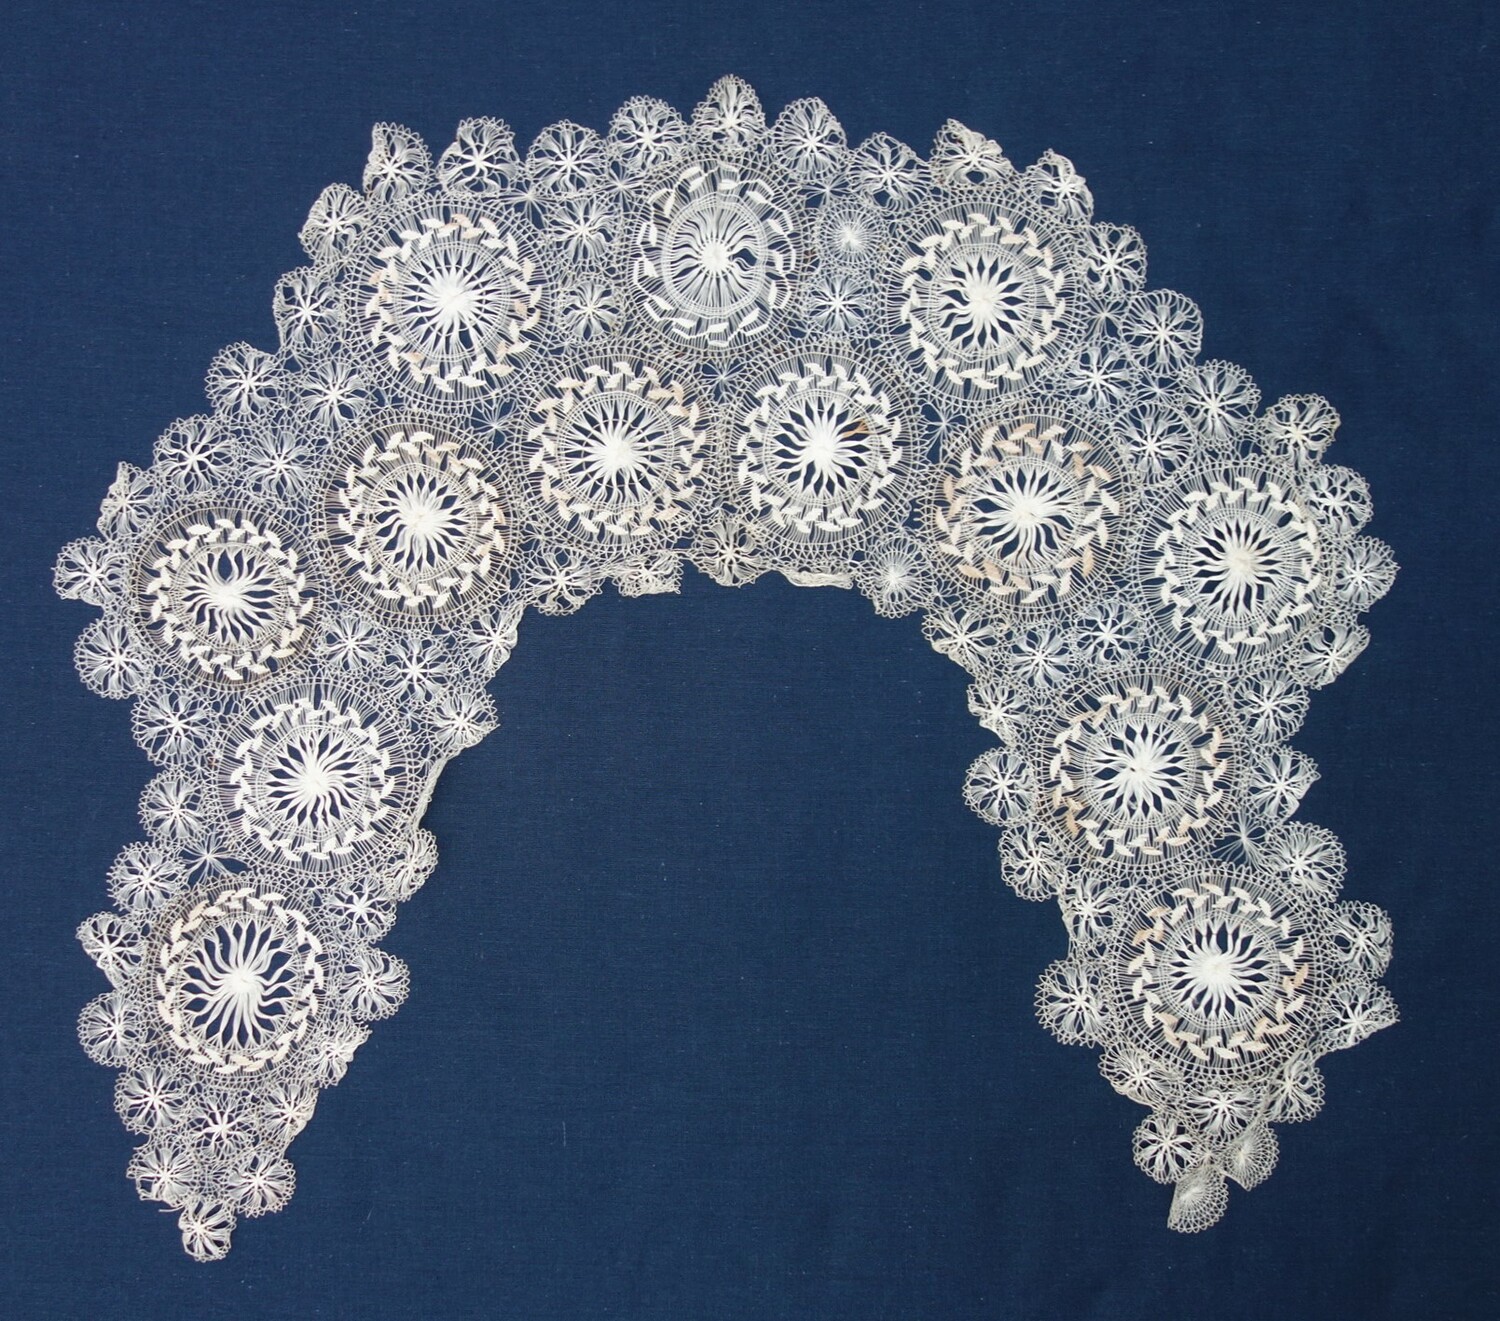 A collar made from Tenerife lace, late-19th century (TRC 2020.0462).